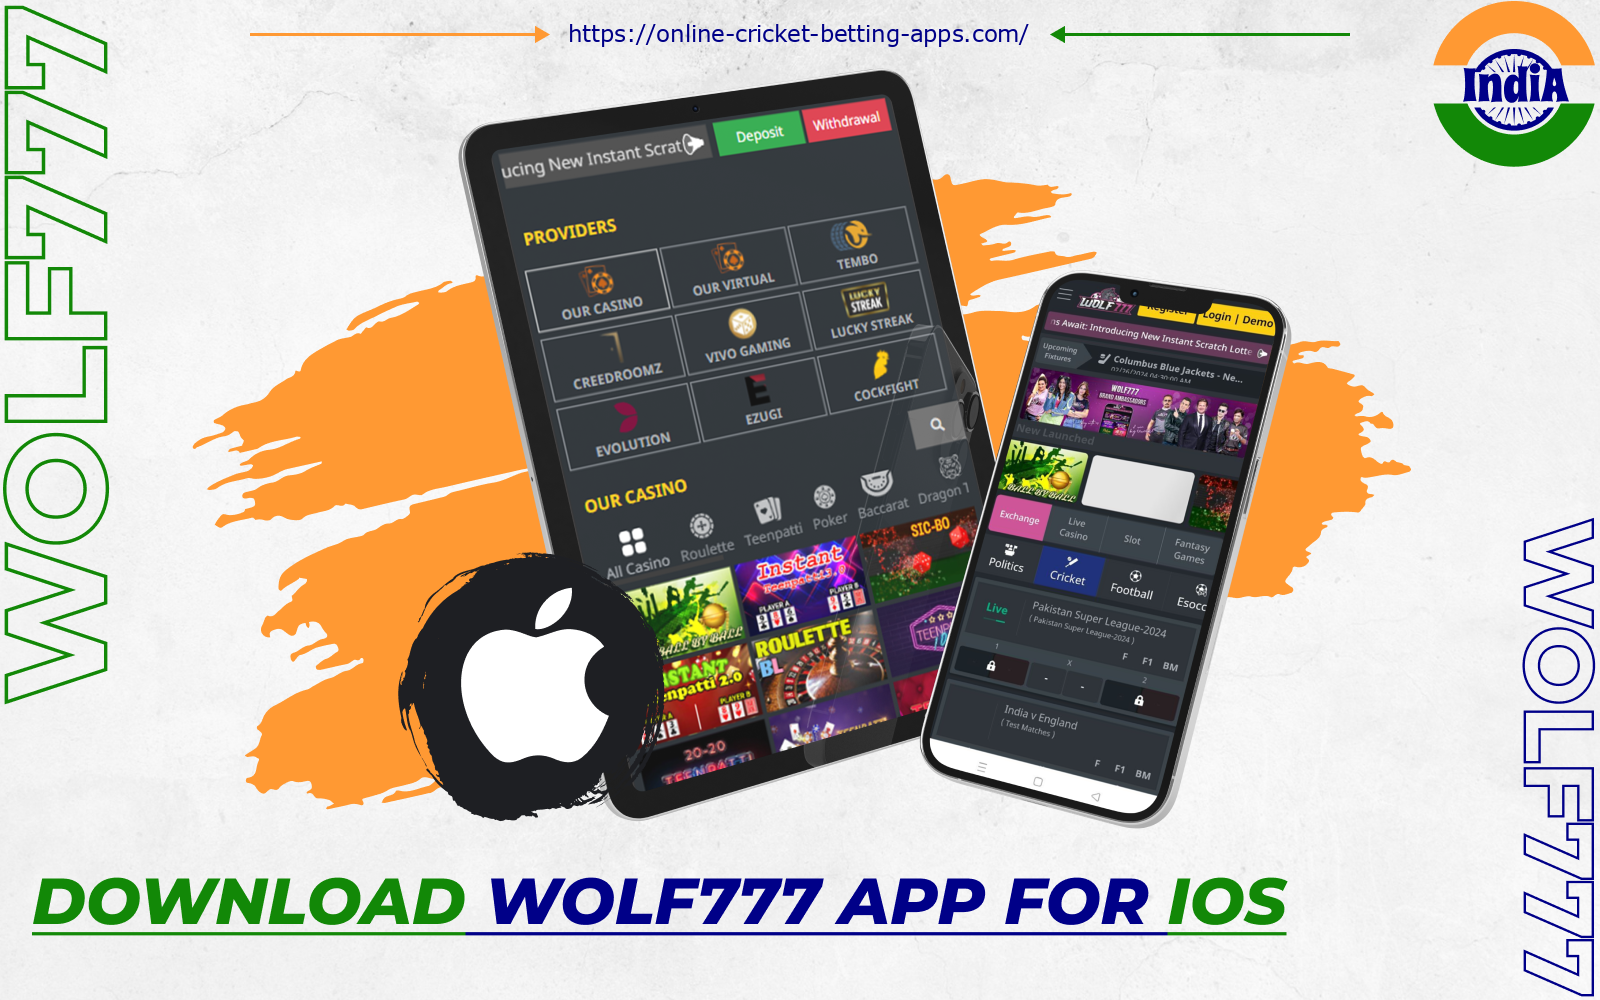 Wolf777 India Casino has a handy iOS app with all the features of the site